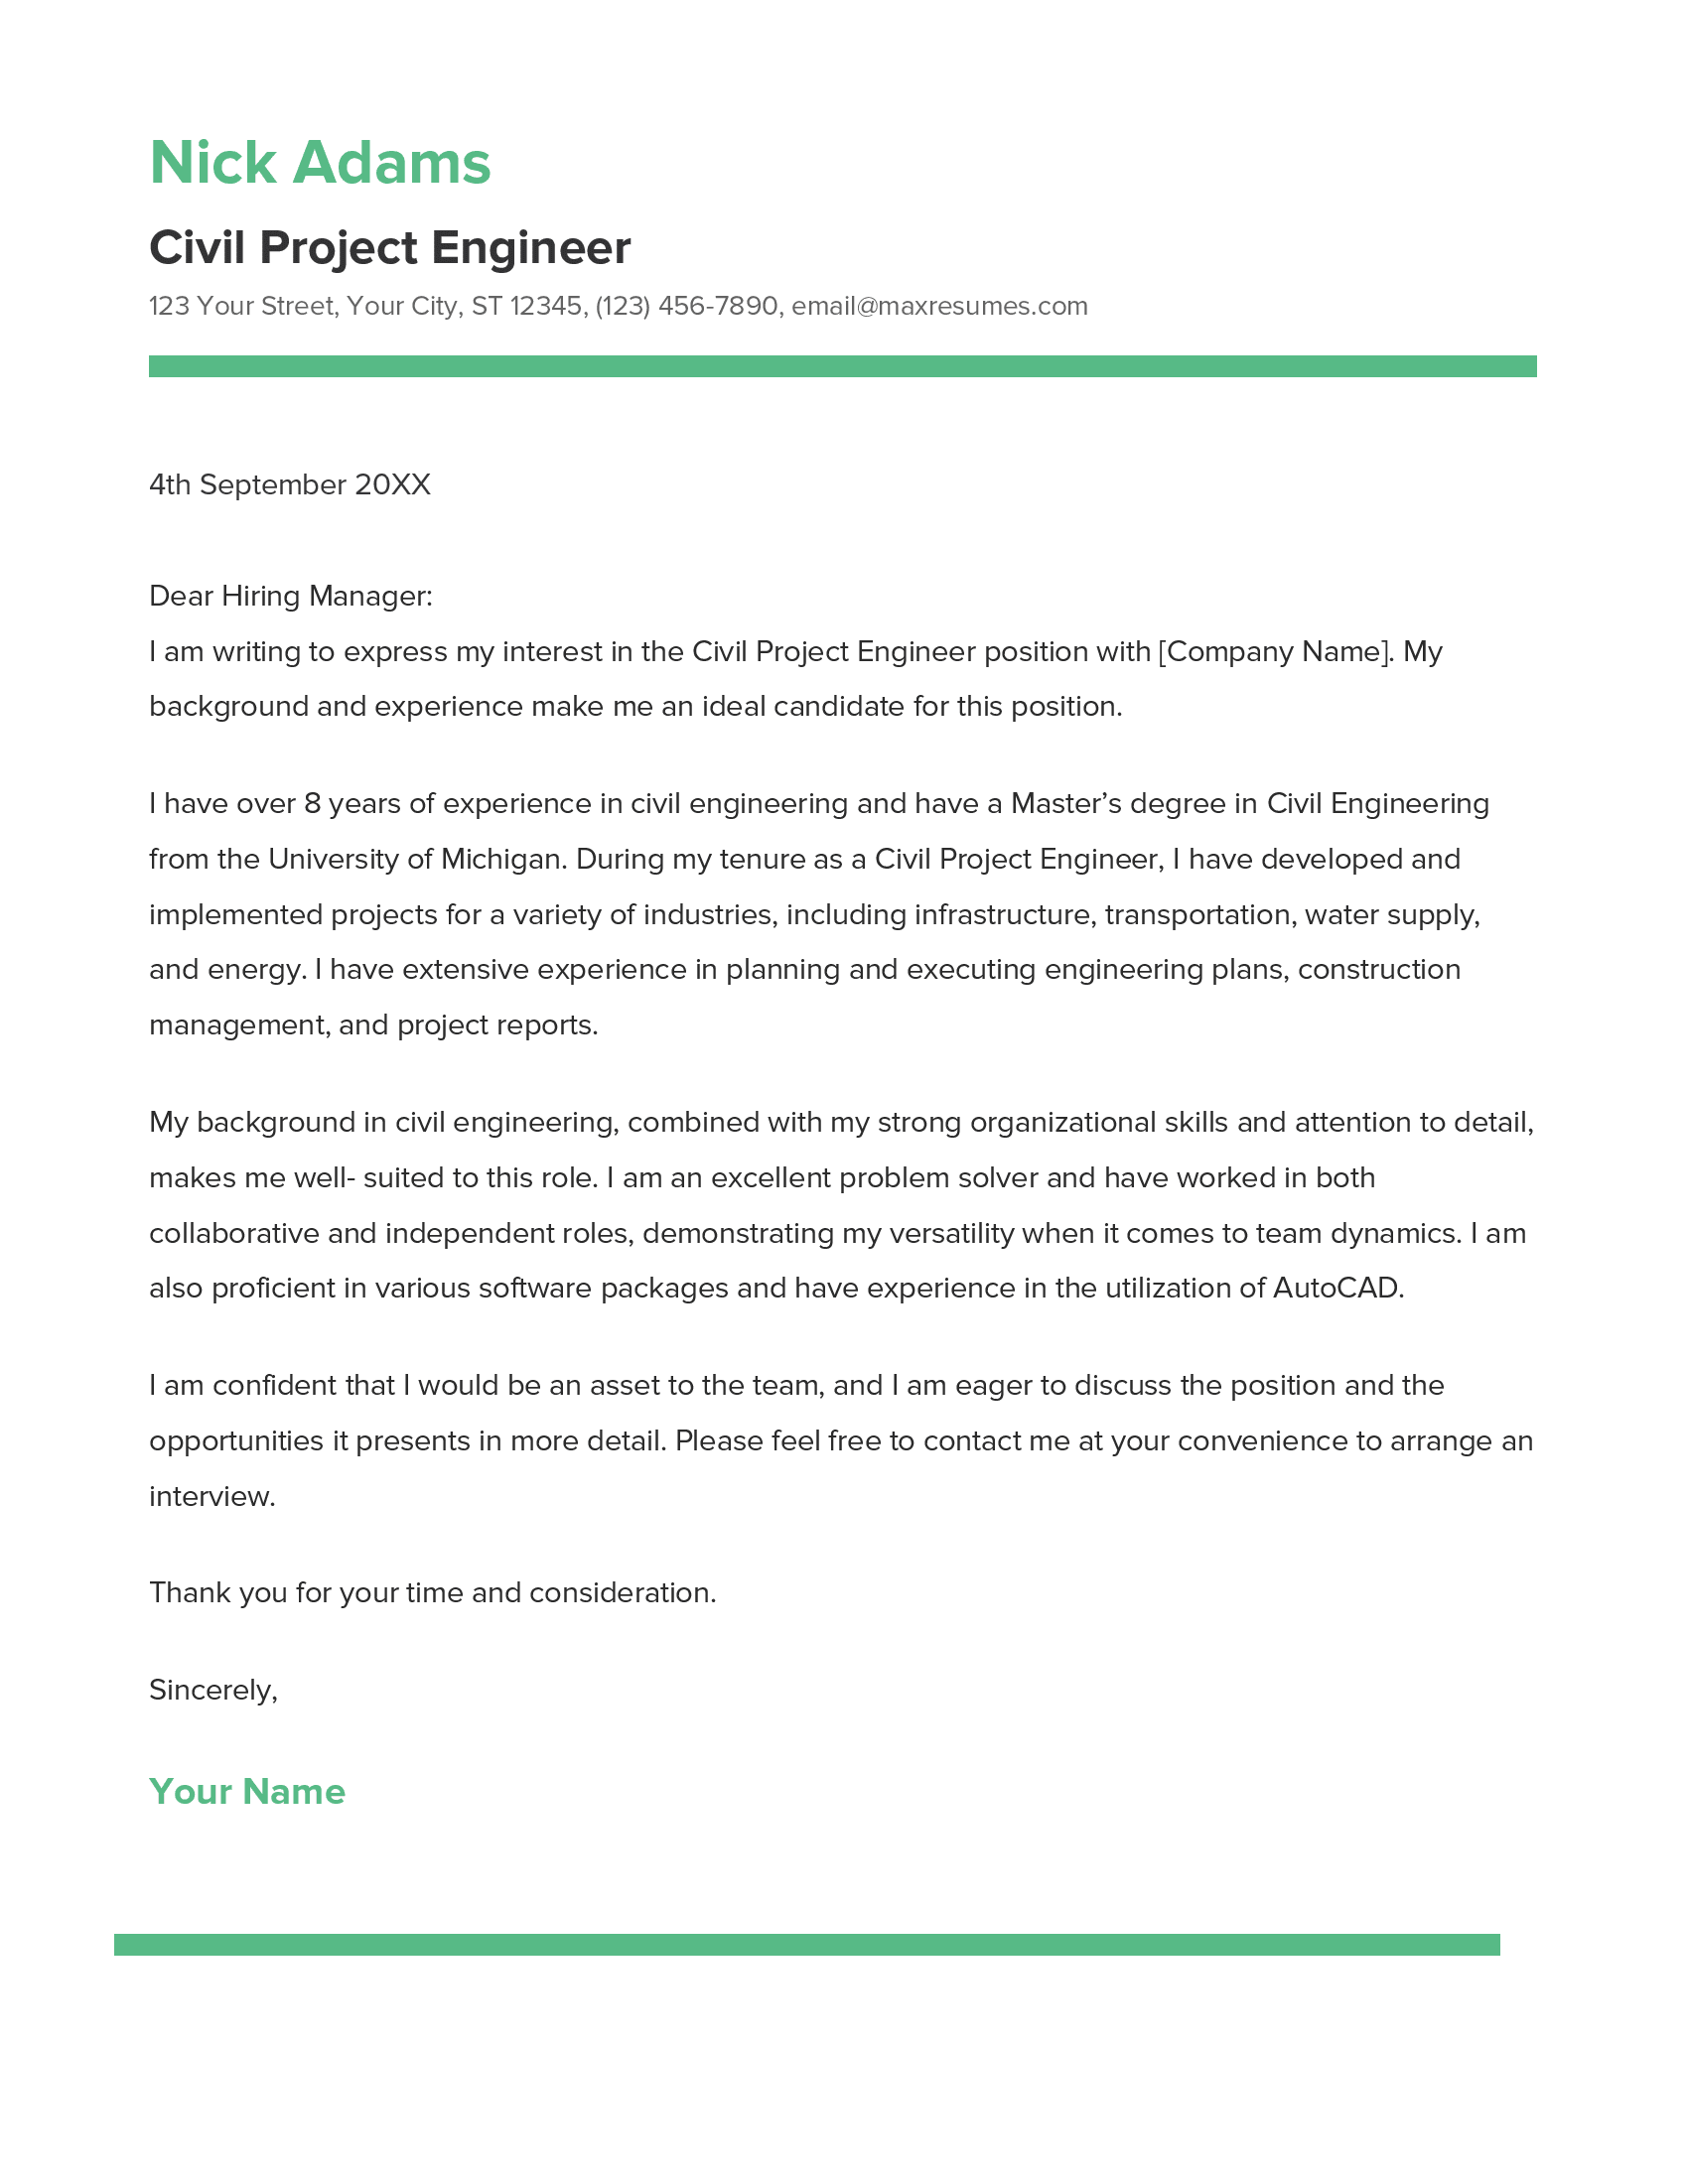 Civil Project Engineer Cover Letter Example